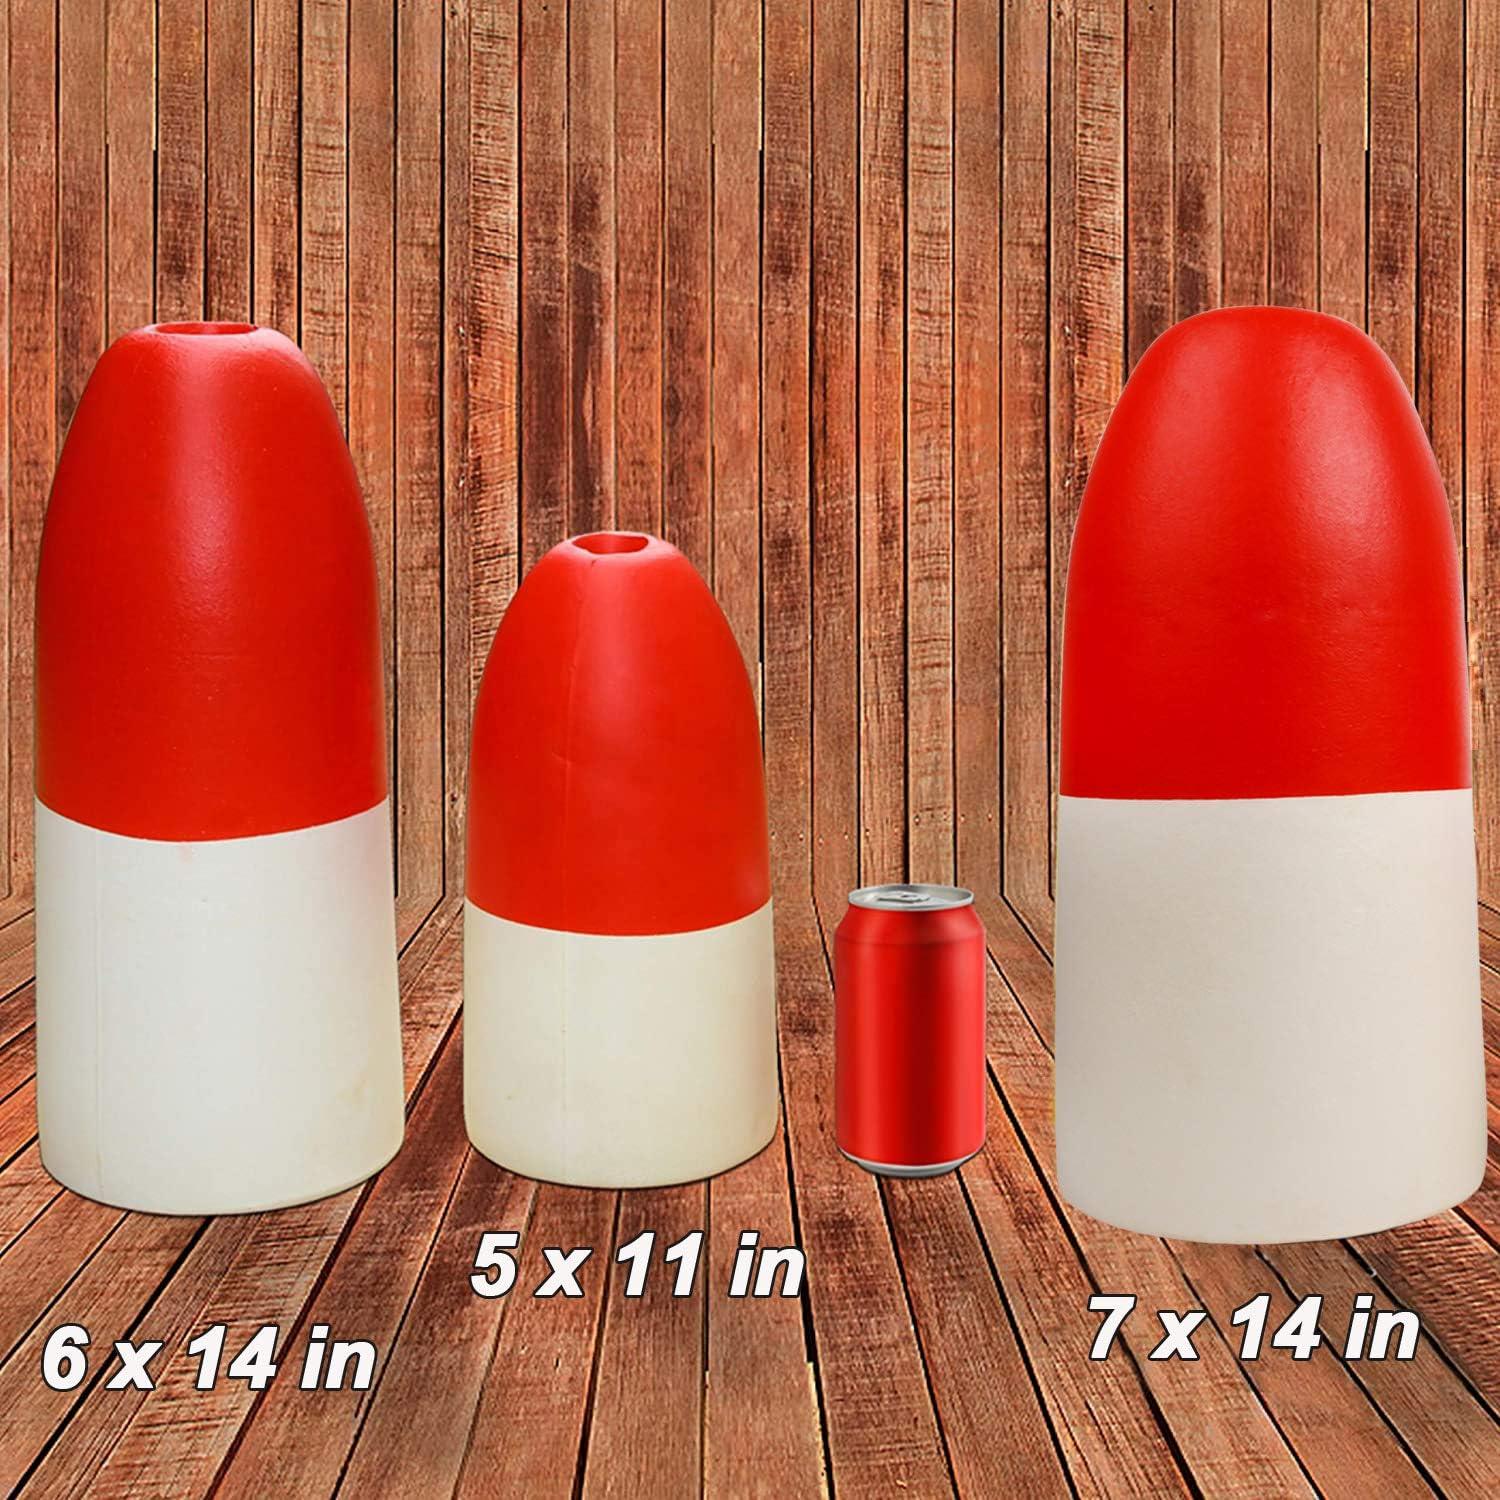 Crab Fishing Trap Floats Buoy - Kayak Outrigger Stabilizer Crab Pot Markers  5x11 6x14 7x14 inch Red/White 1pcs-7x14 Inch